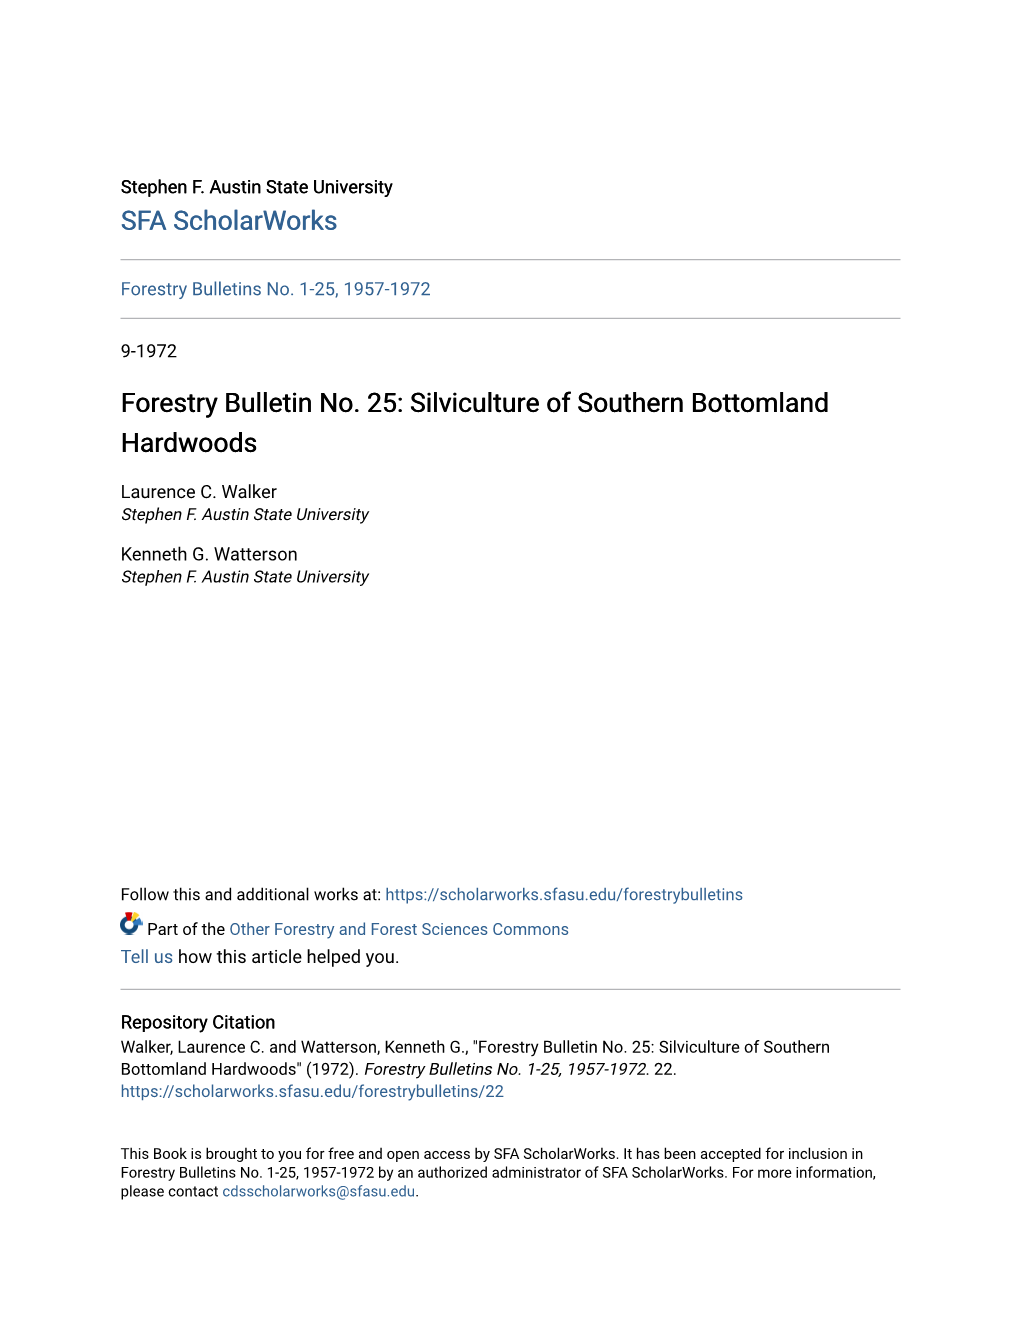 Forestry Bulletin No. 25: Silviculture of Southern Bottomland Hardwoods